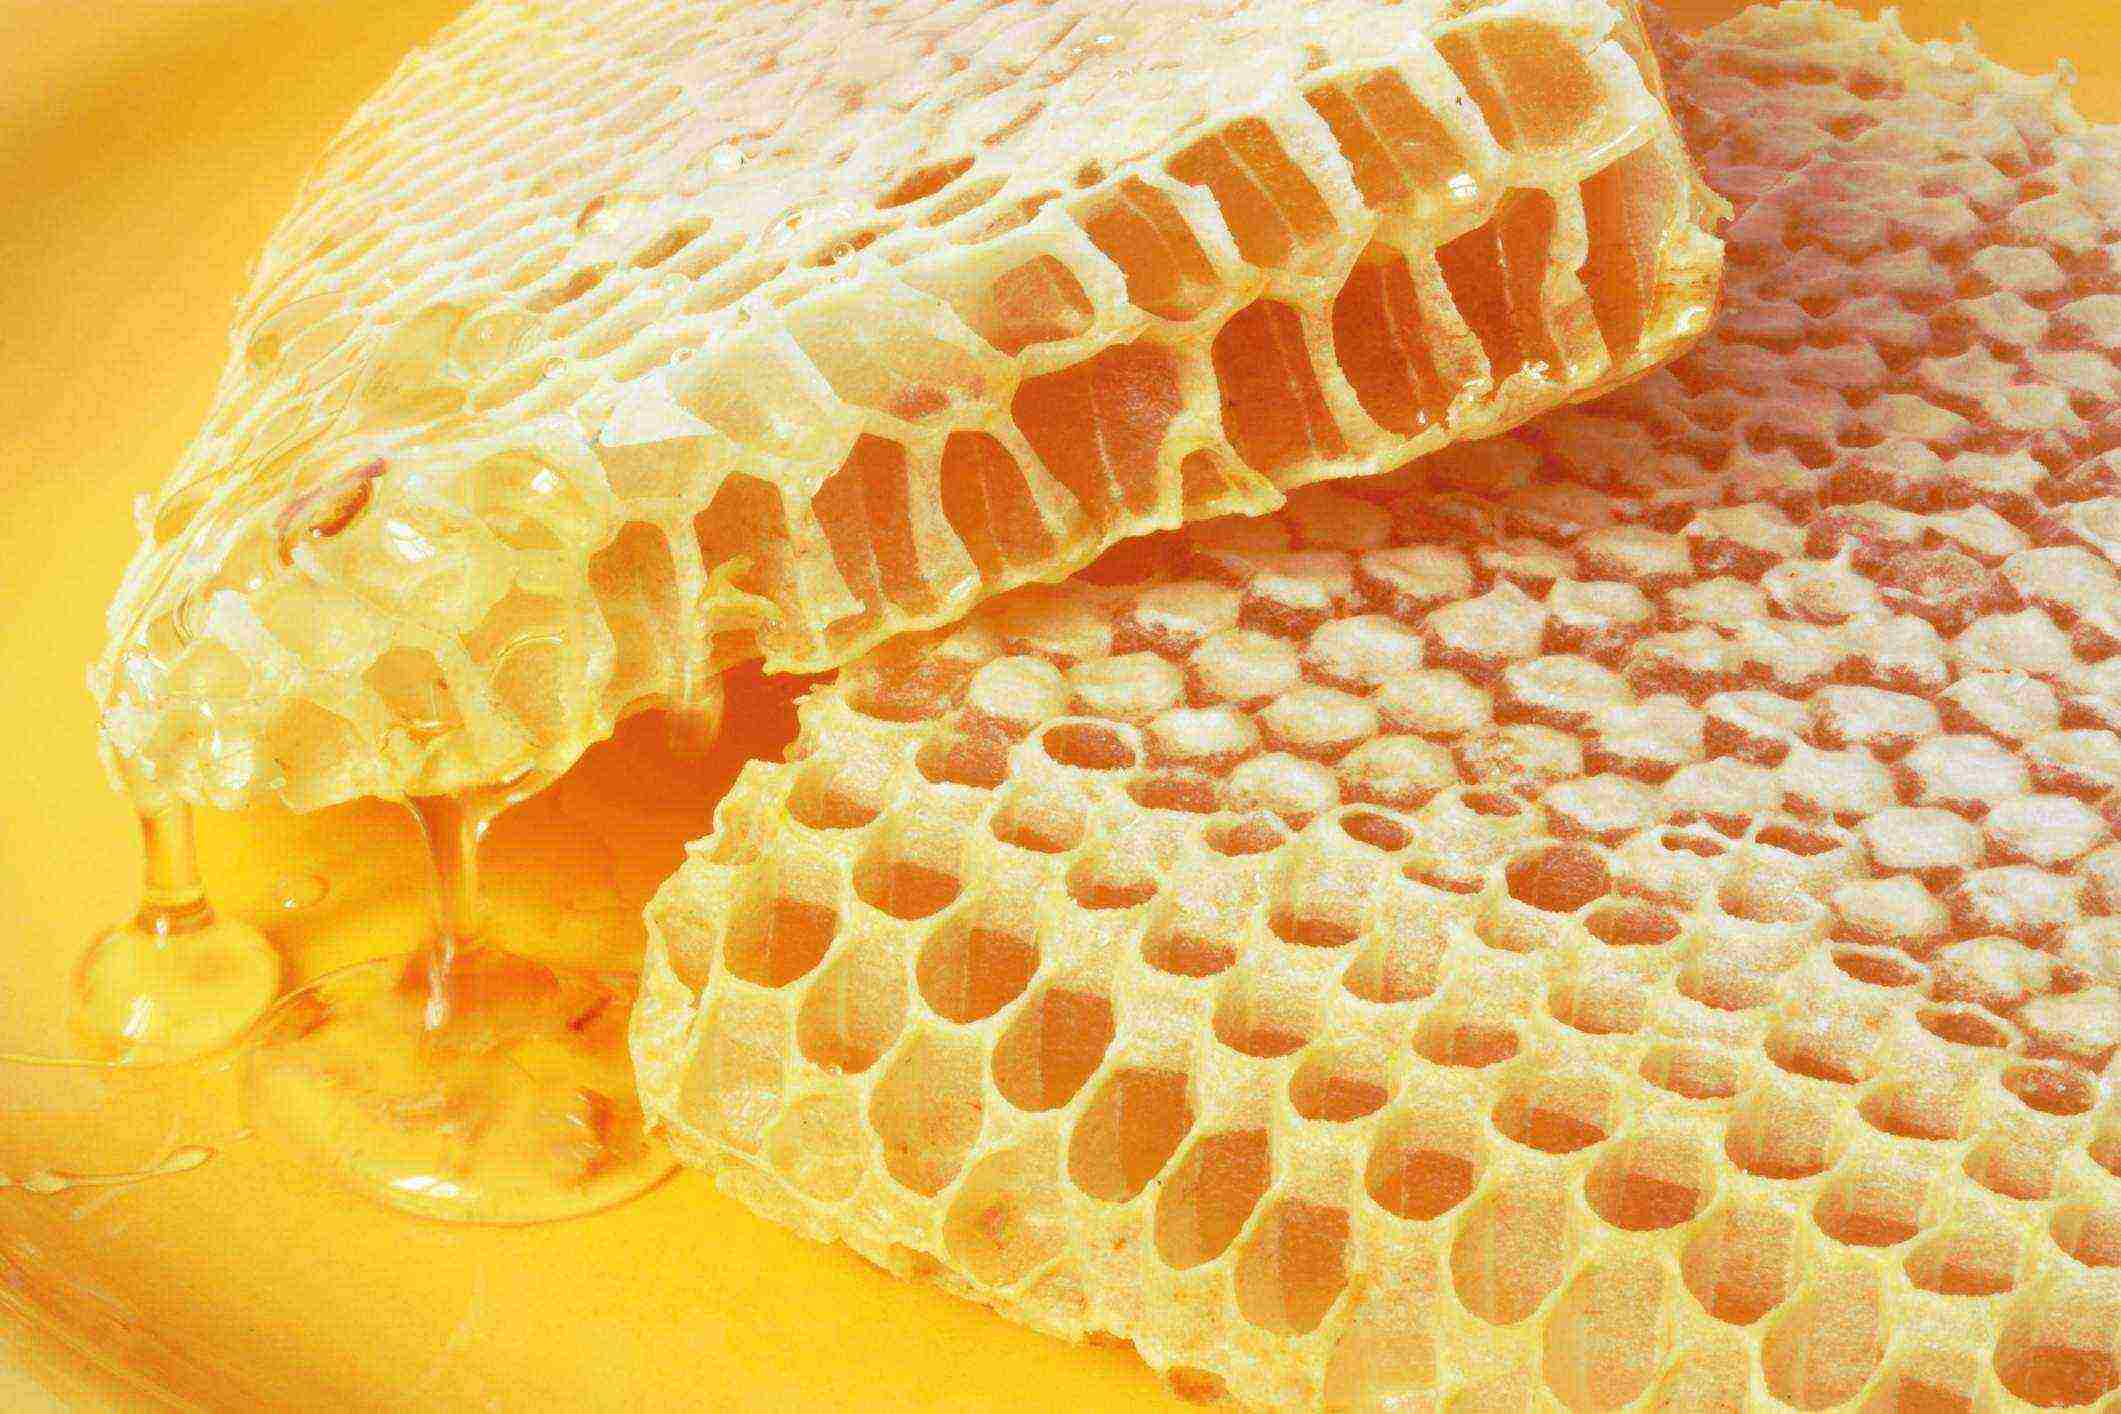 which varieties of honey are better